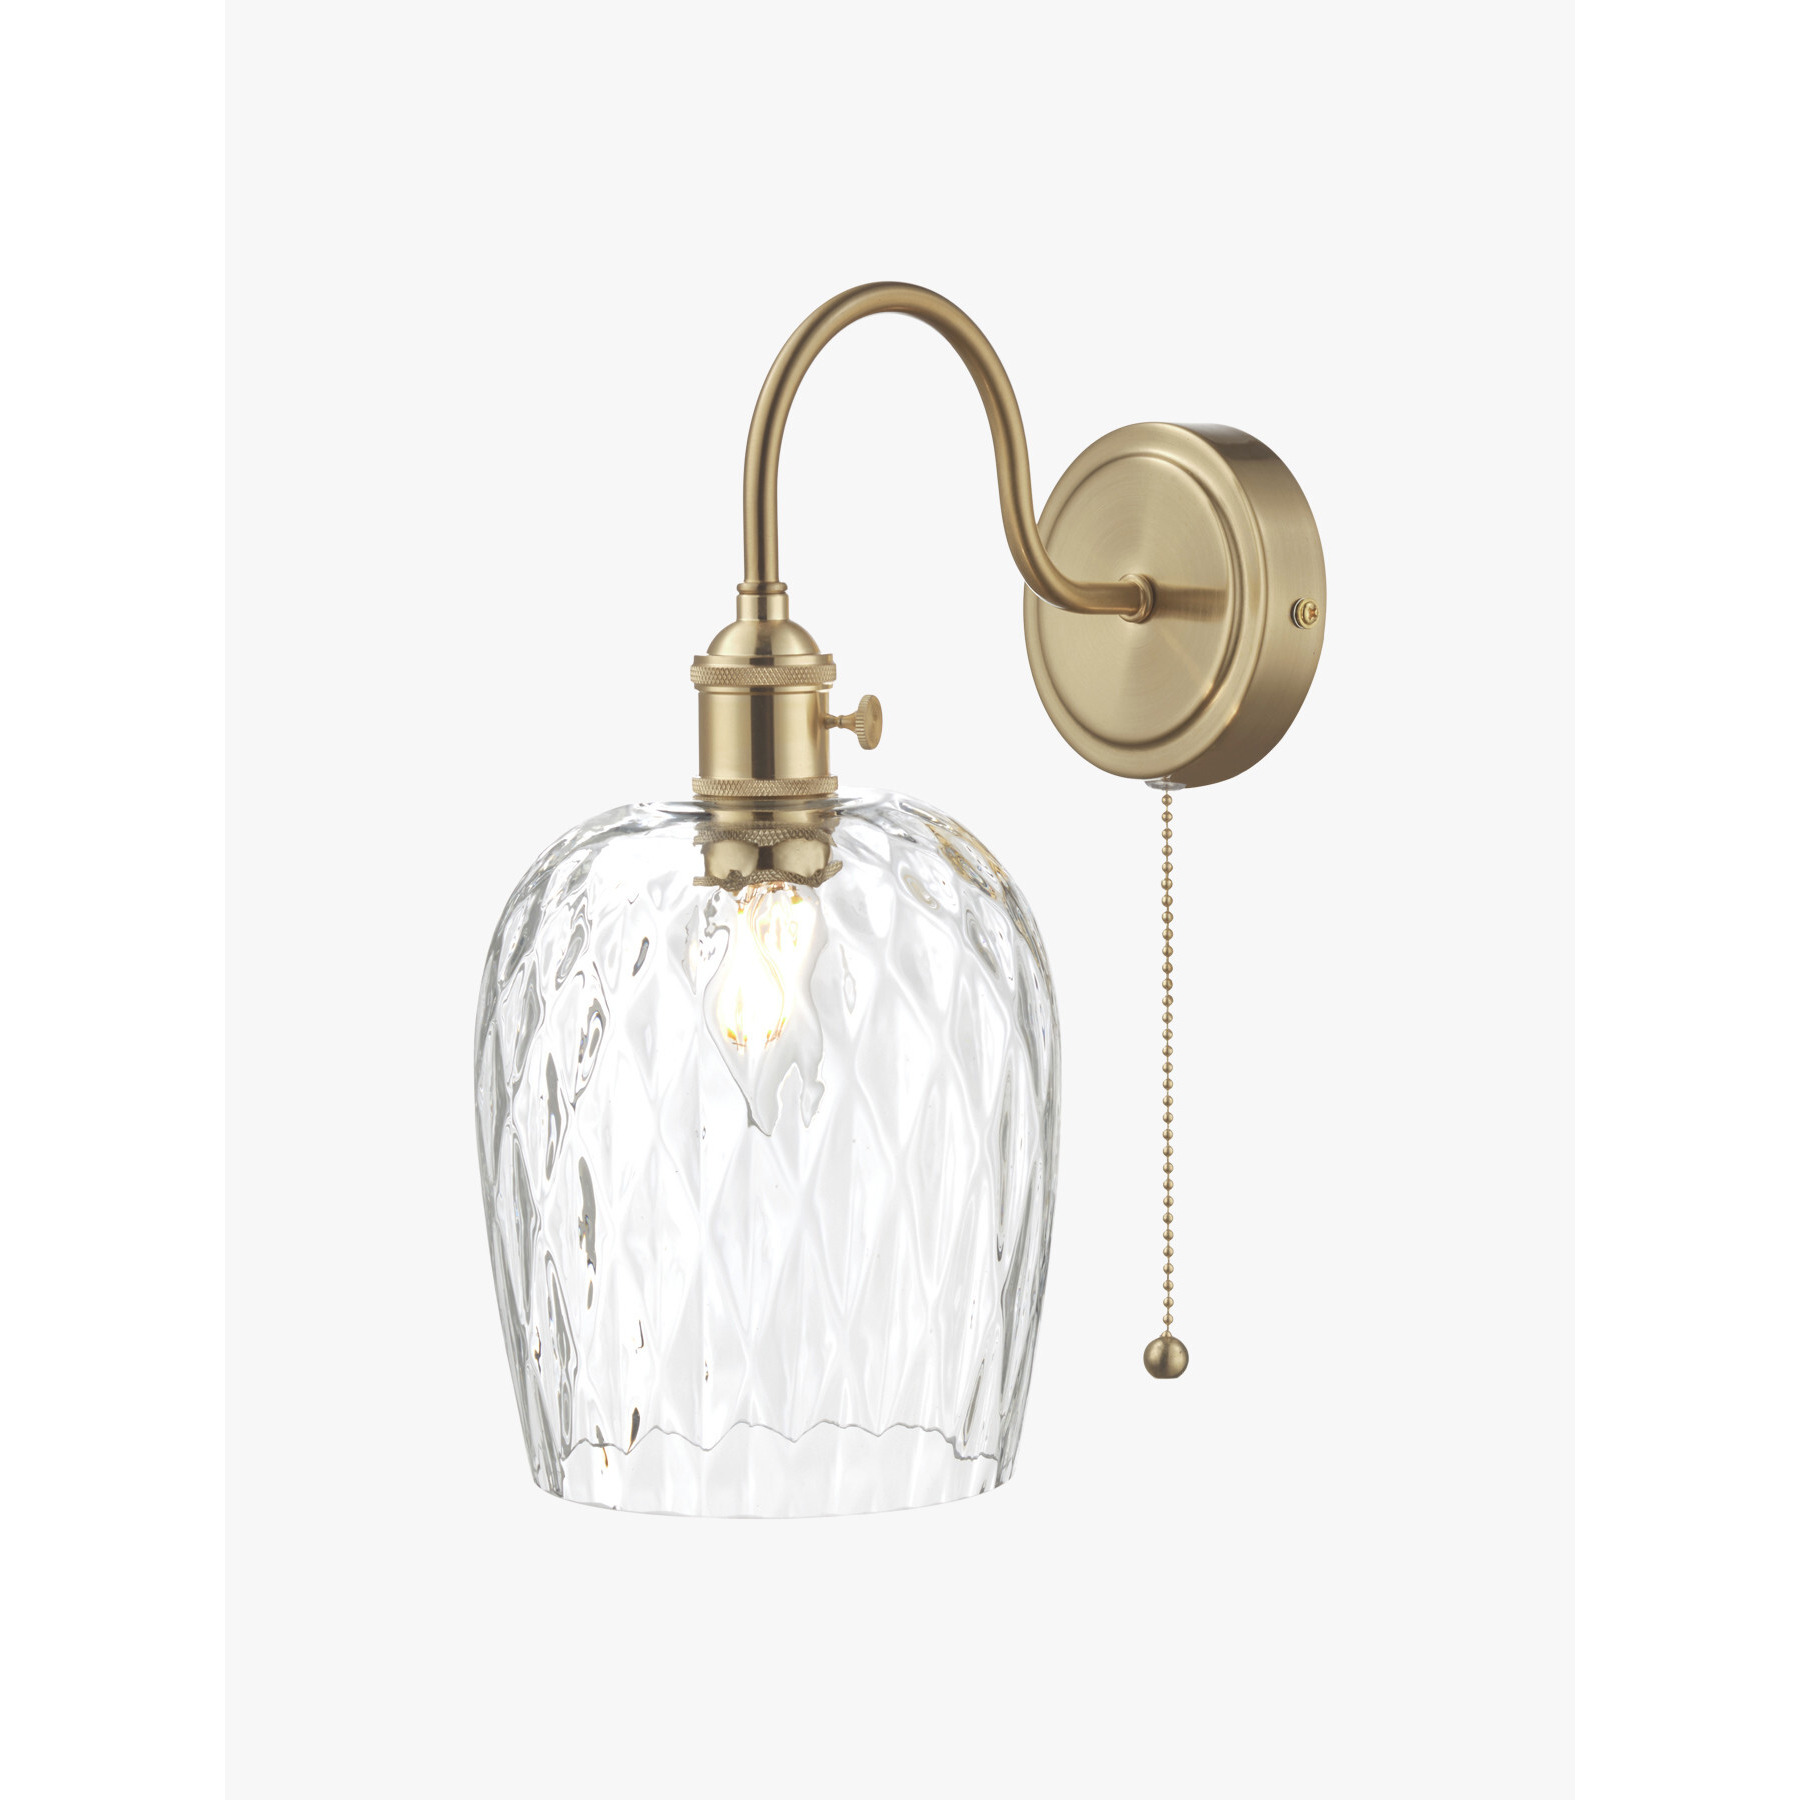 Dar Lighting Hadano Brass Wall Light with Clear Dimpled Shade Gold - image 1